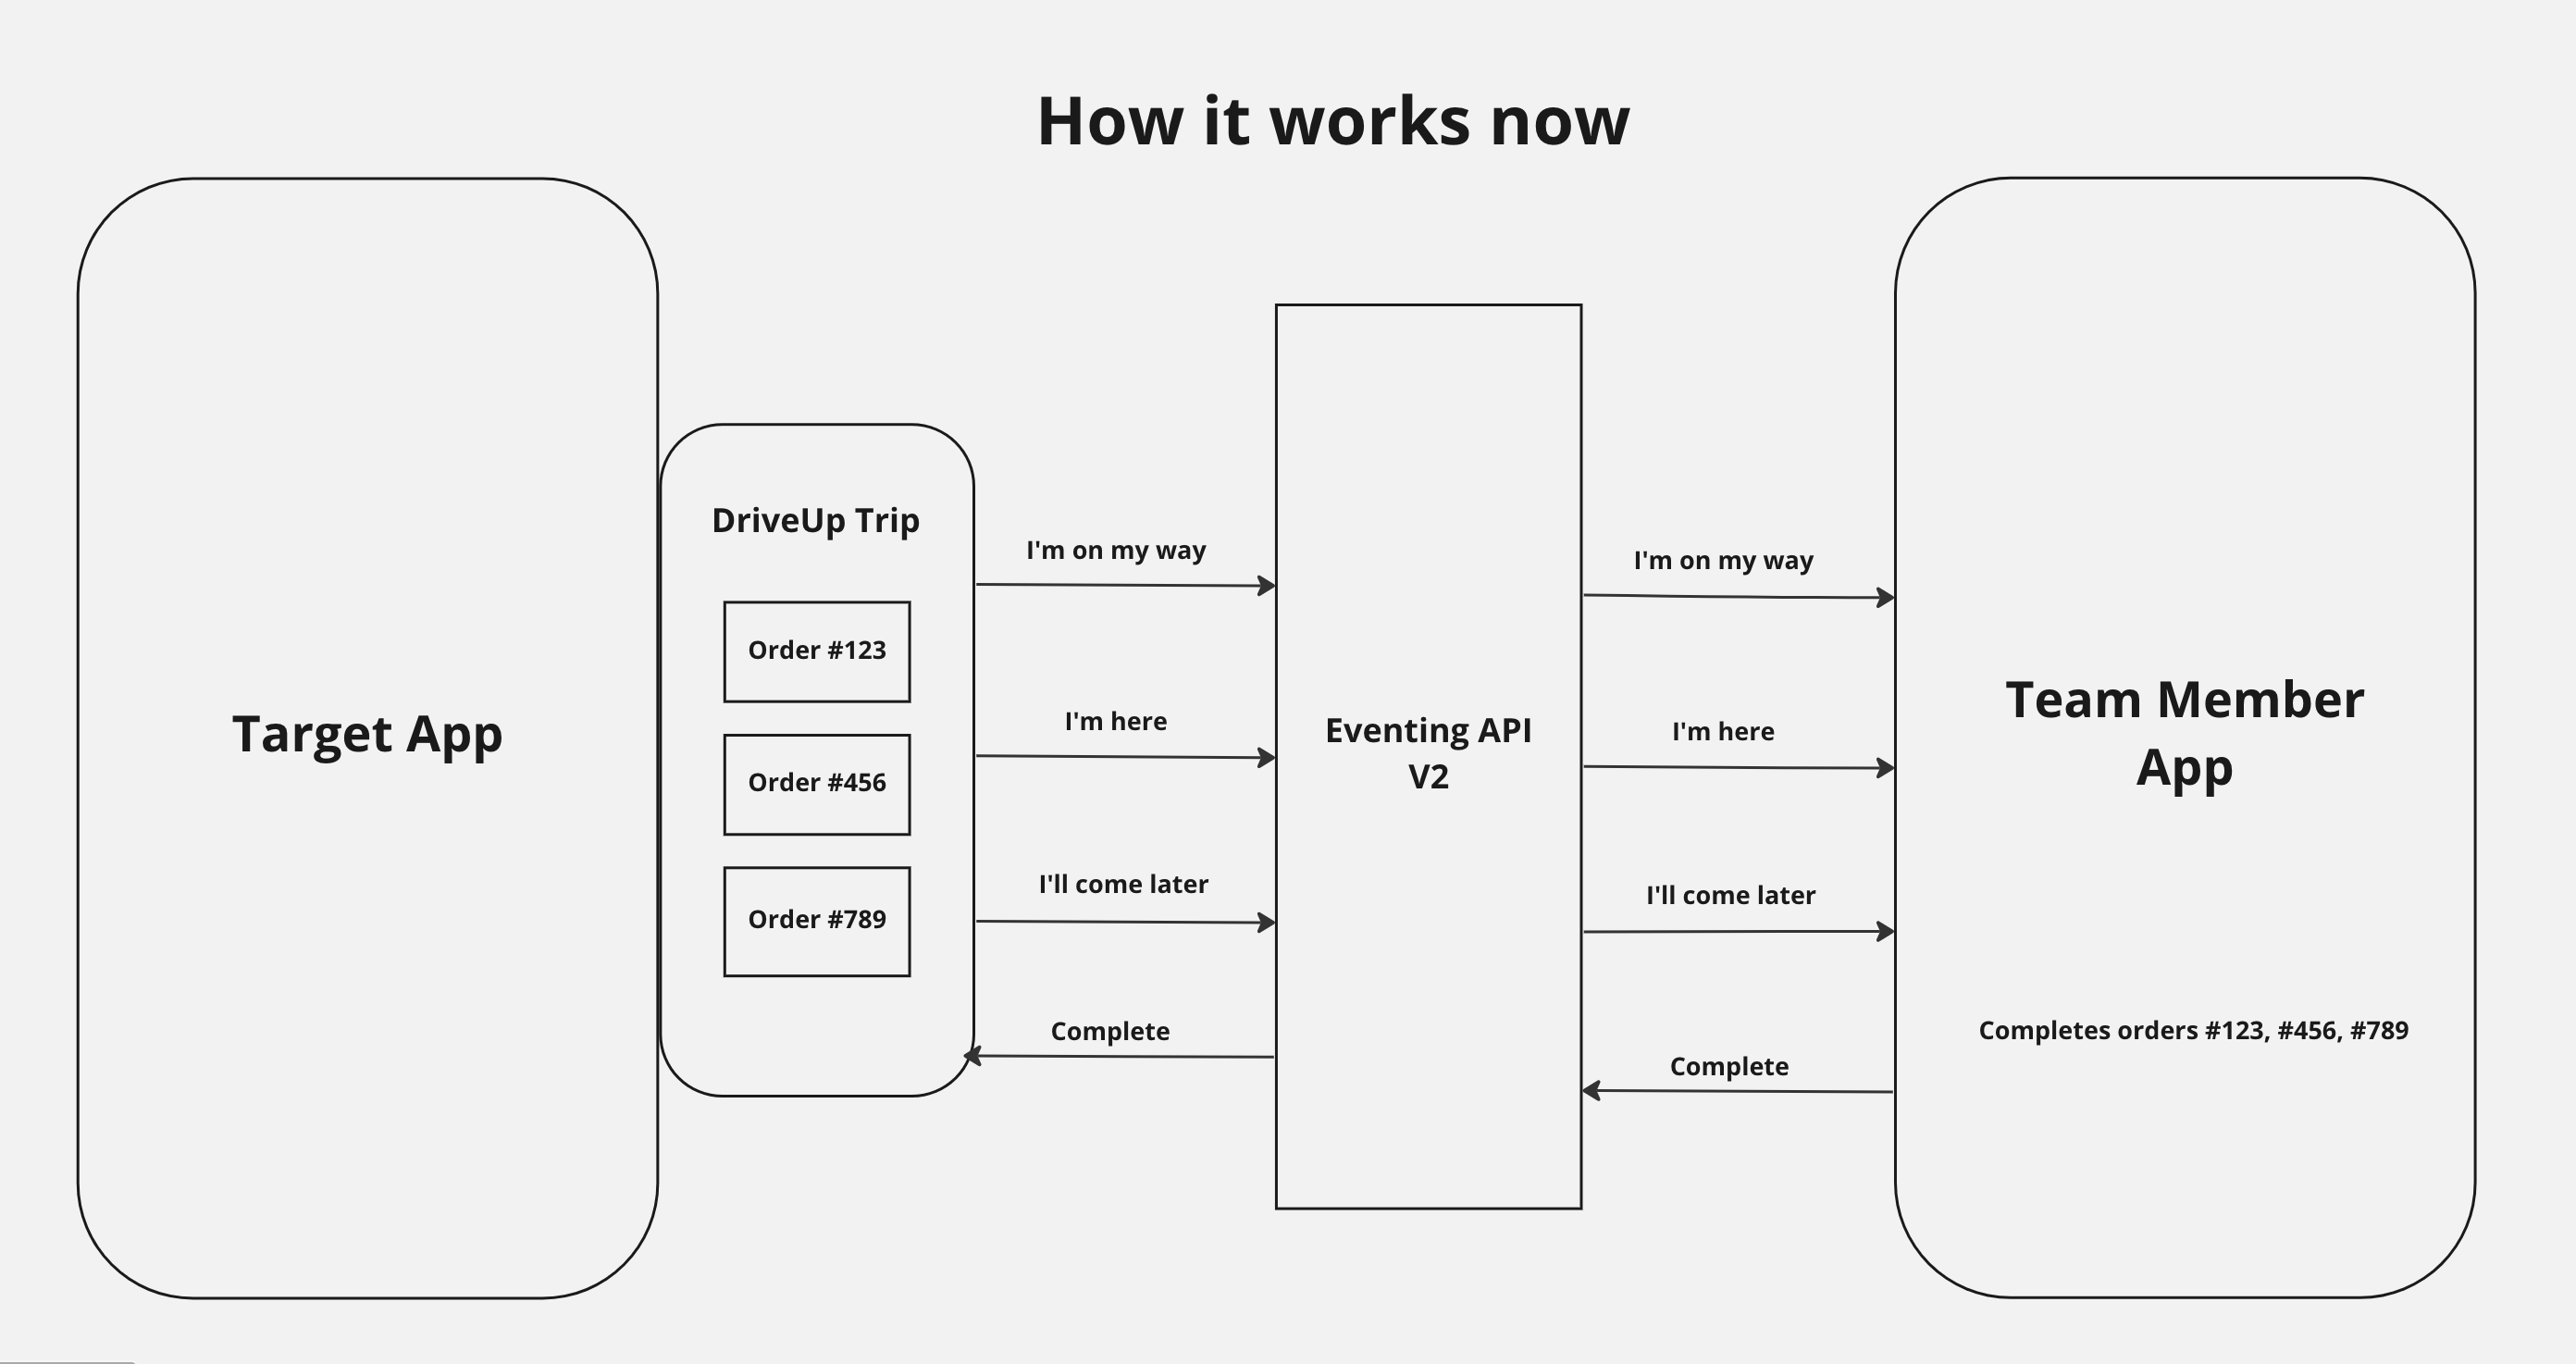 Diagram of the Target eventing API, with multiple orders shown on the left side of the diagram for the guest app, with the events more streamlined and organized than the previous version. Three separate orders are shown organized into one "trip," thus simplifying the process.